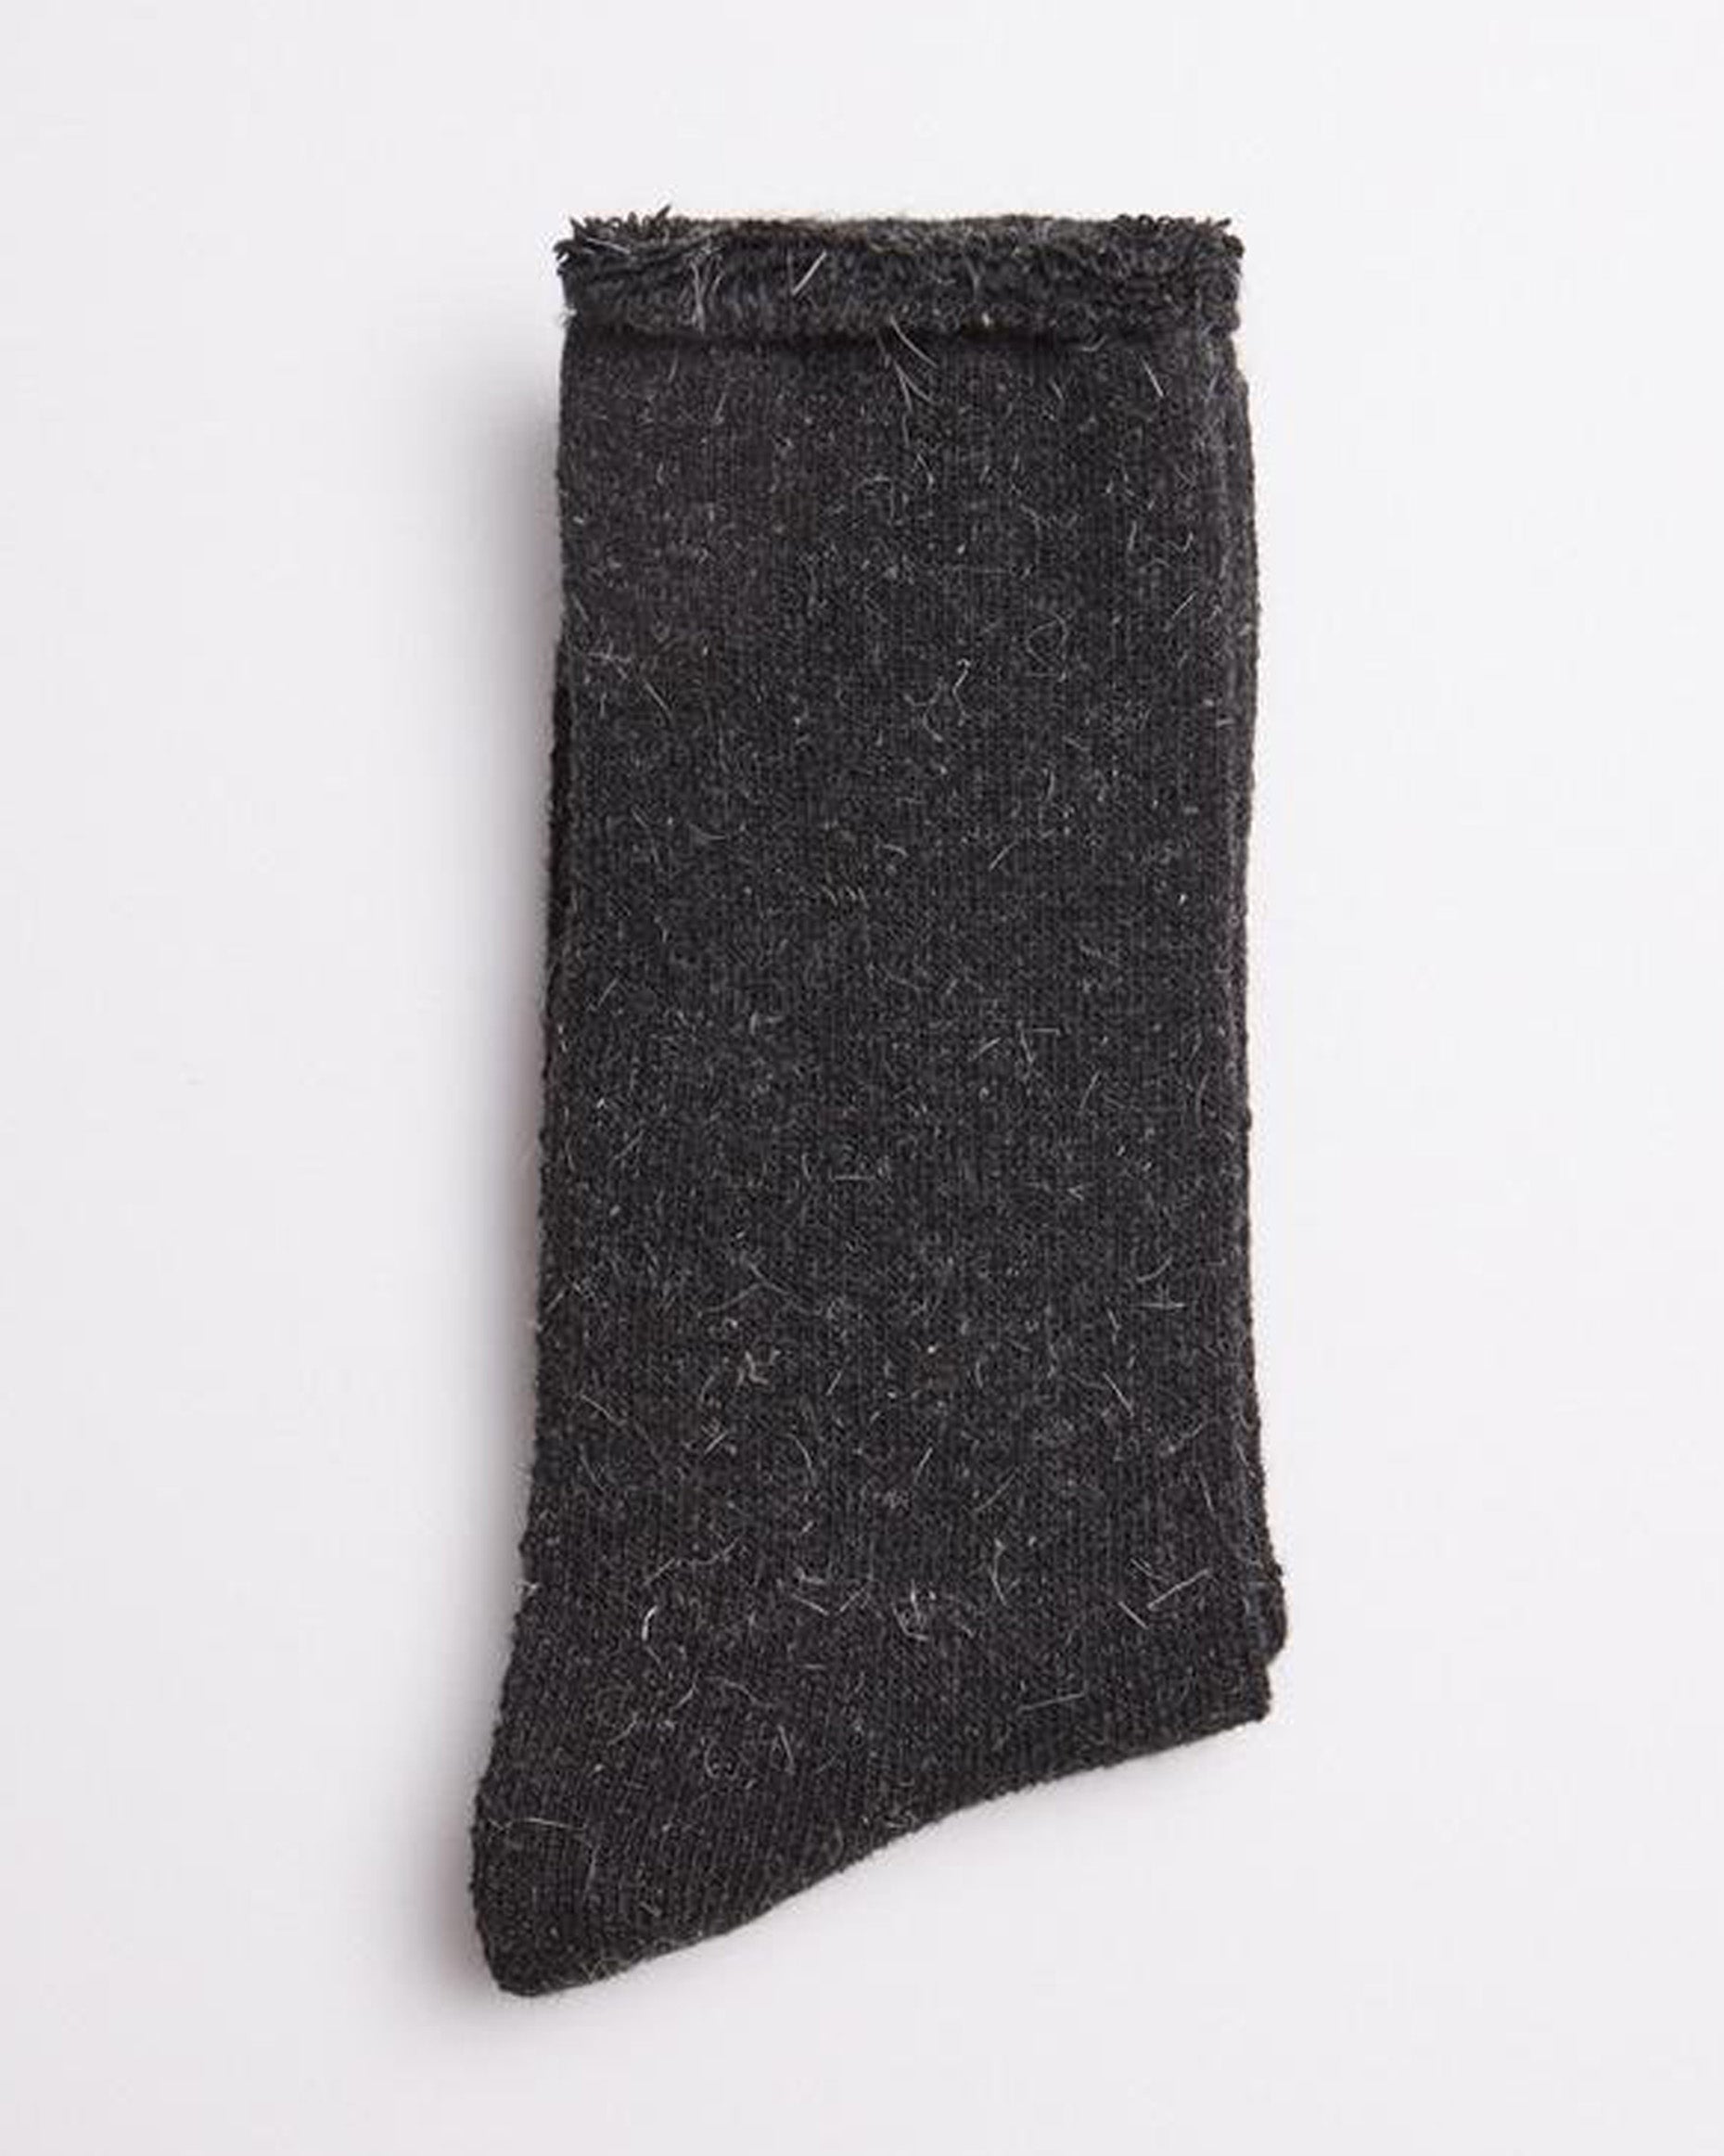 Ysabel Mora 22738 No Cuff Angora Socks - Men's warm and thick knitted black angora mix thermal socks with a no cuff roll top.